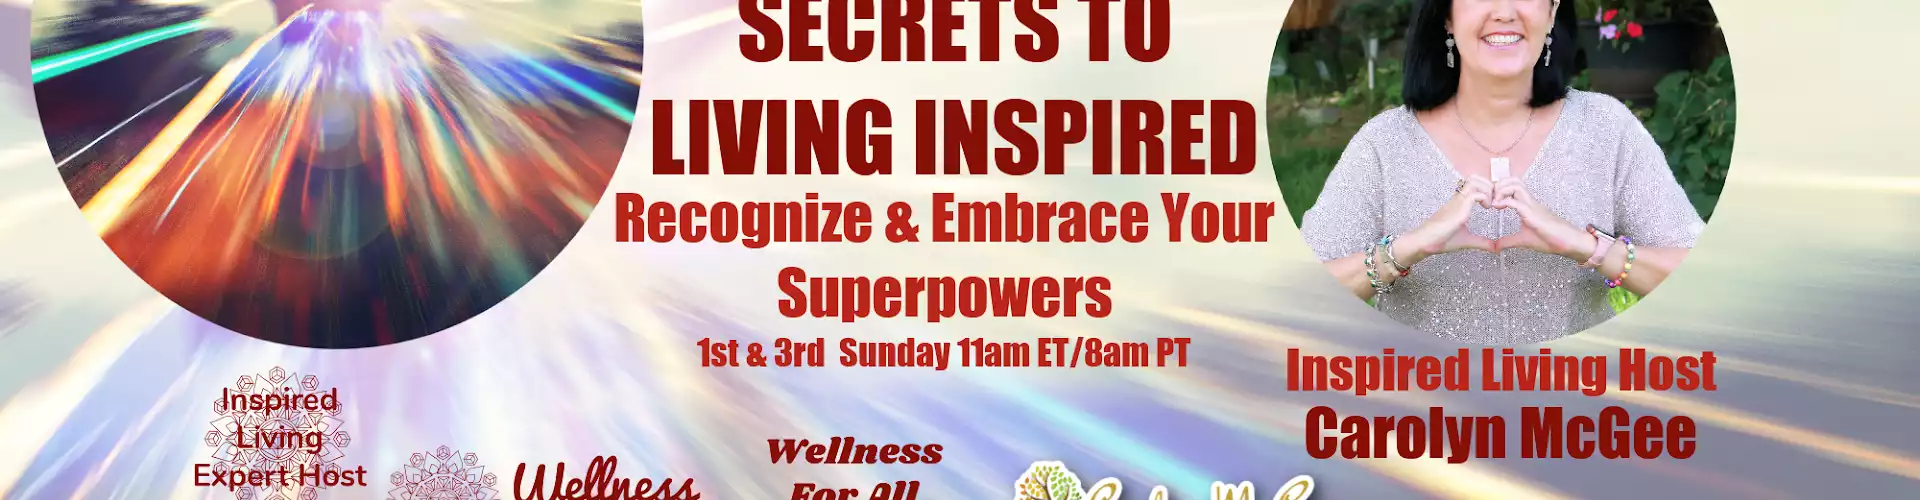 Secrets to Living Inspired Talk Show with Carolyn McGee